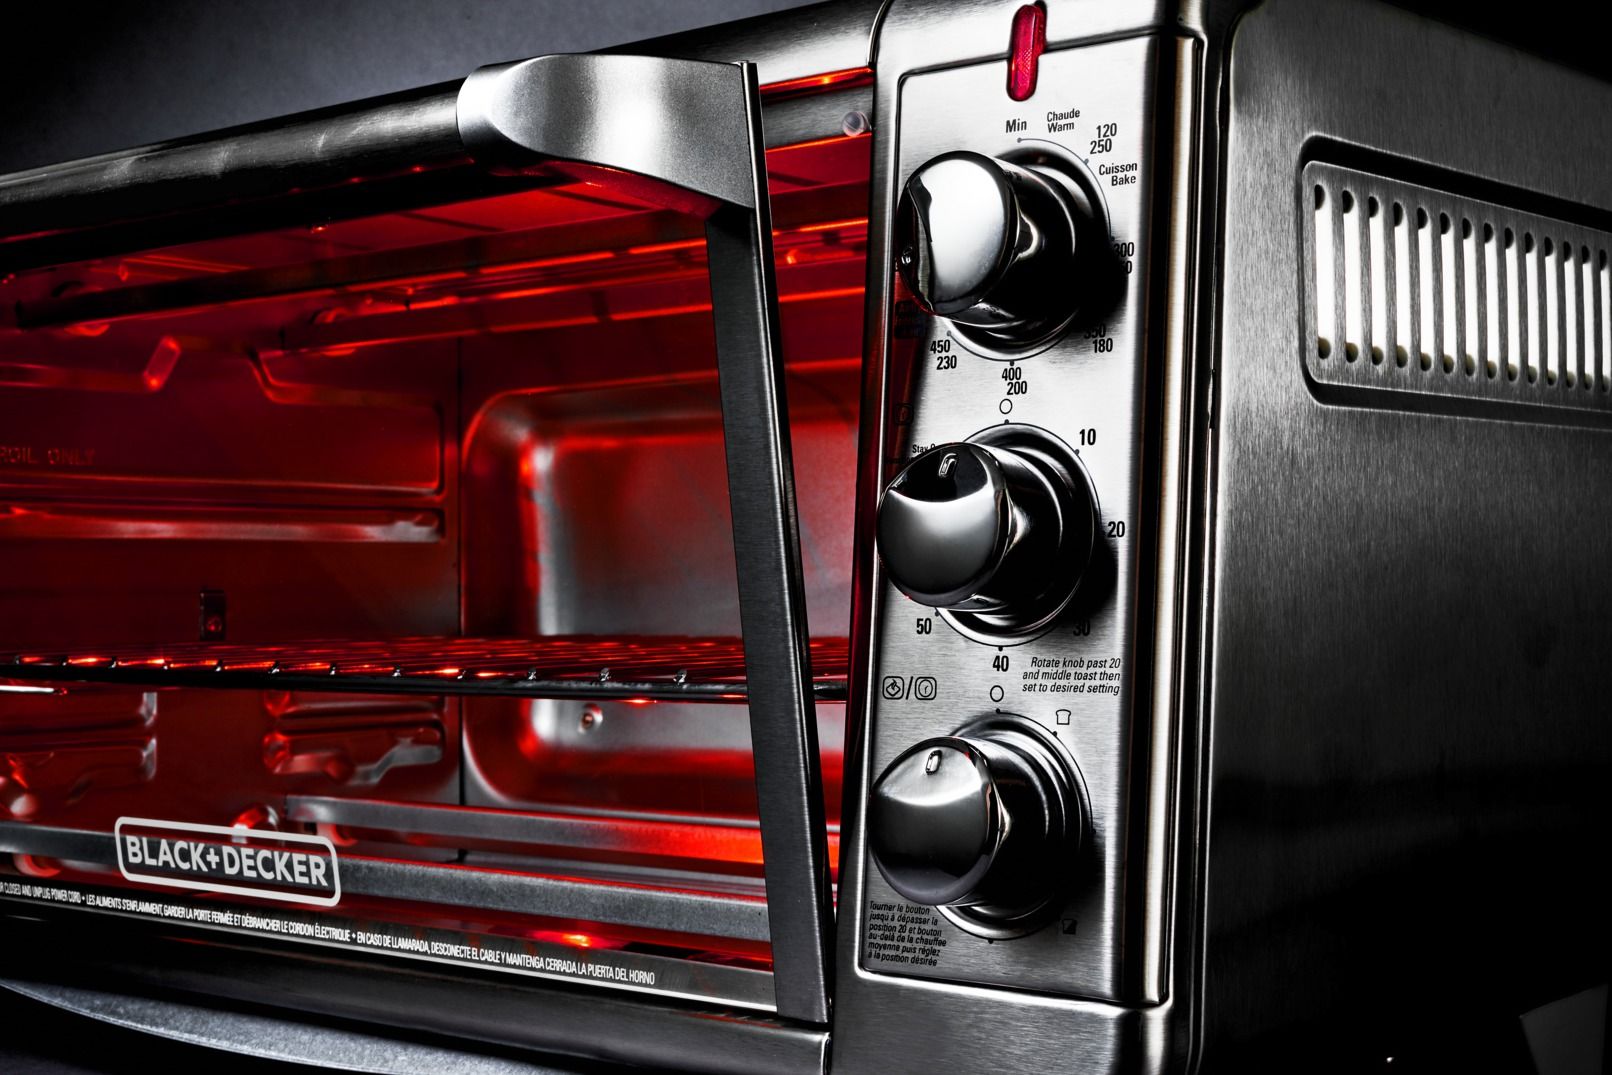 Oven, Automotive lighting, Vehicle, Car, Small appliance, Home appliance, Kitchen appliance, 